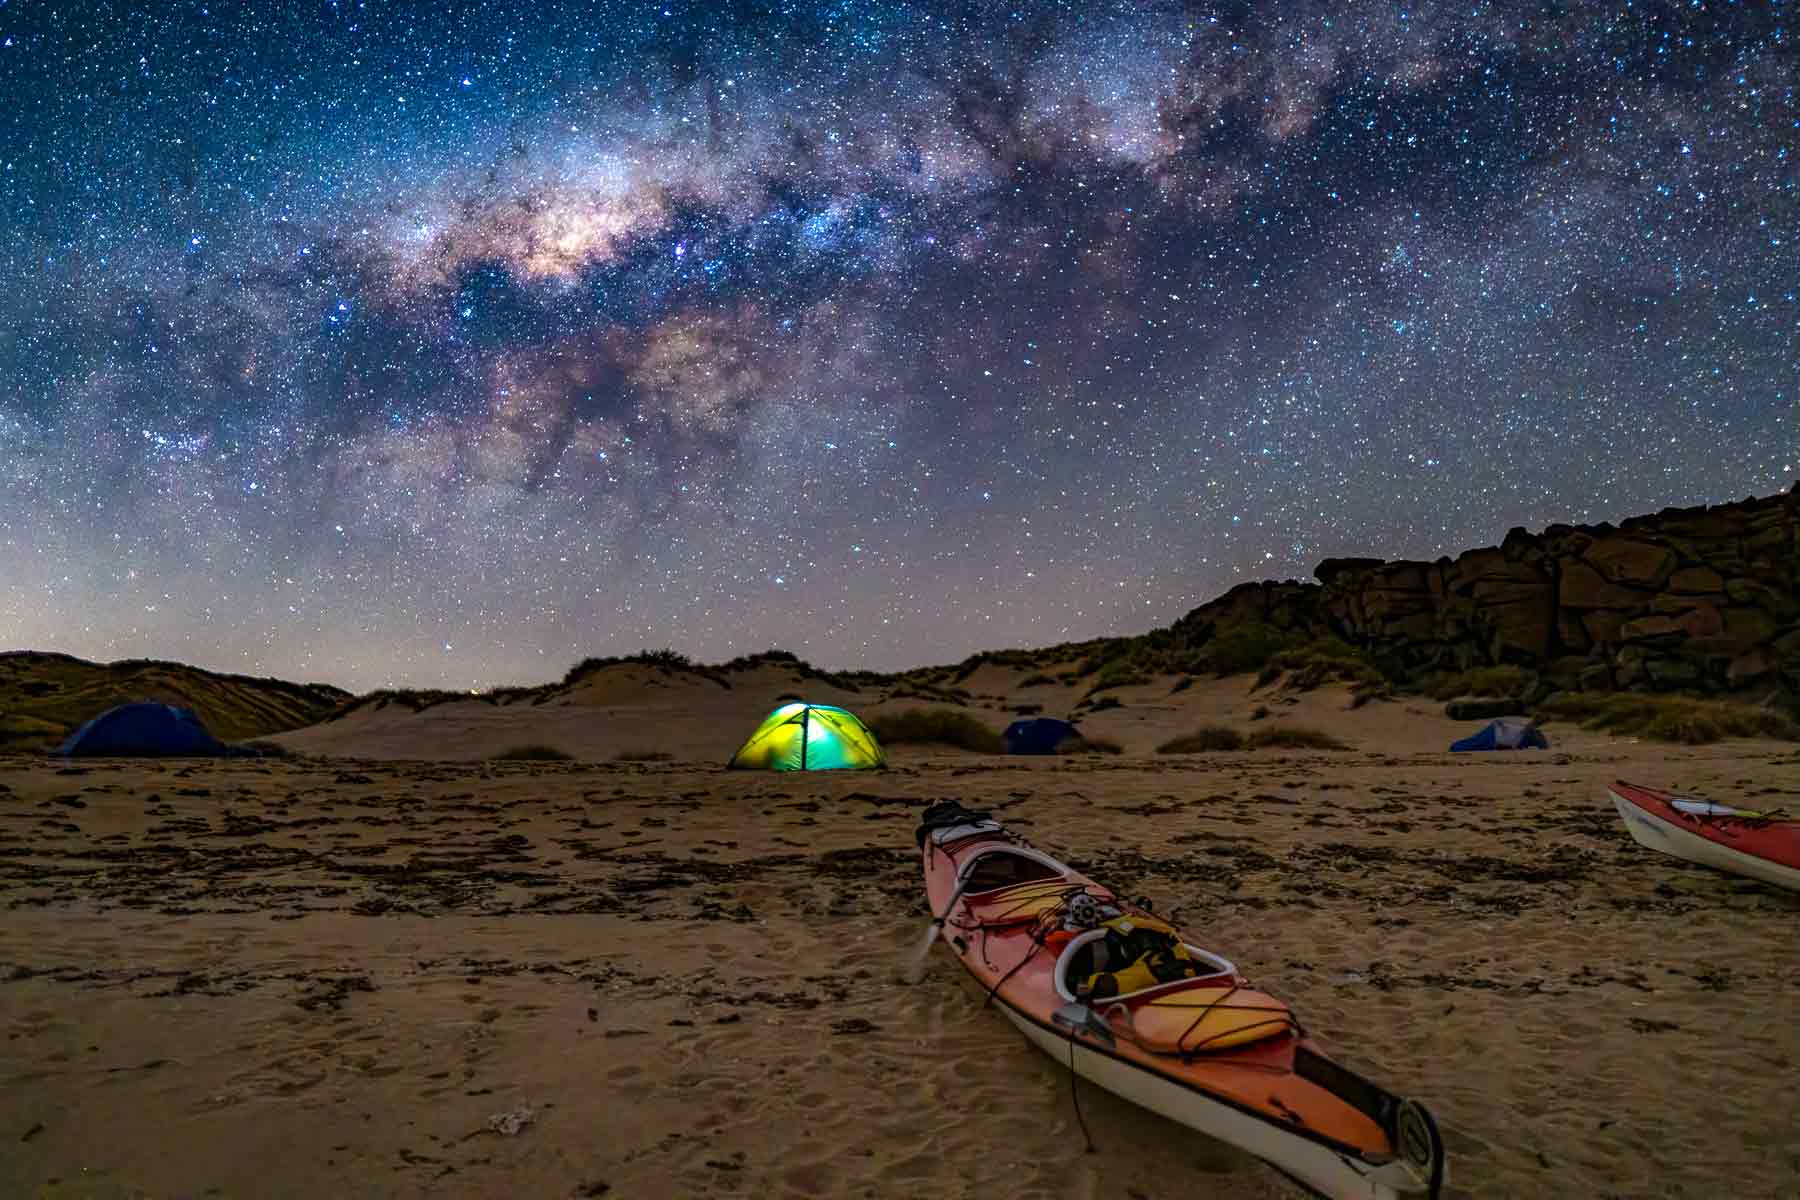 Camping from your sea kayak under the stars